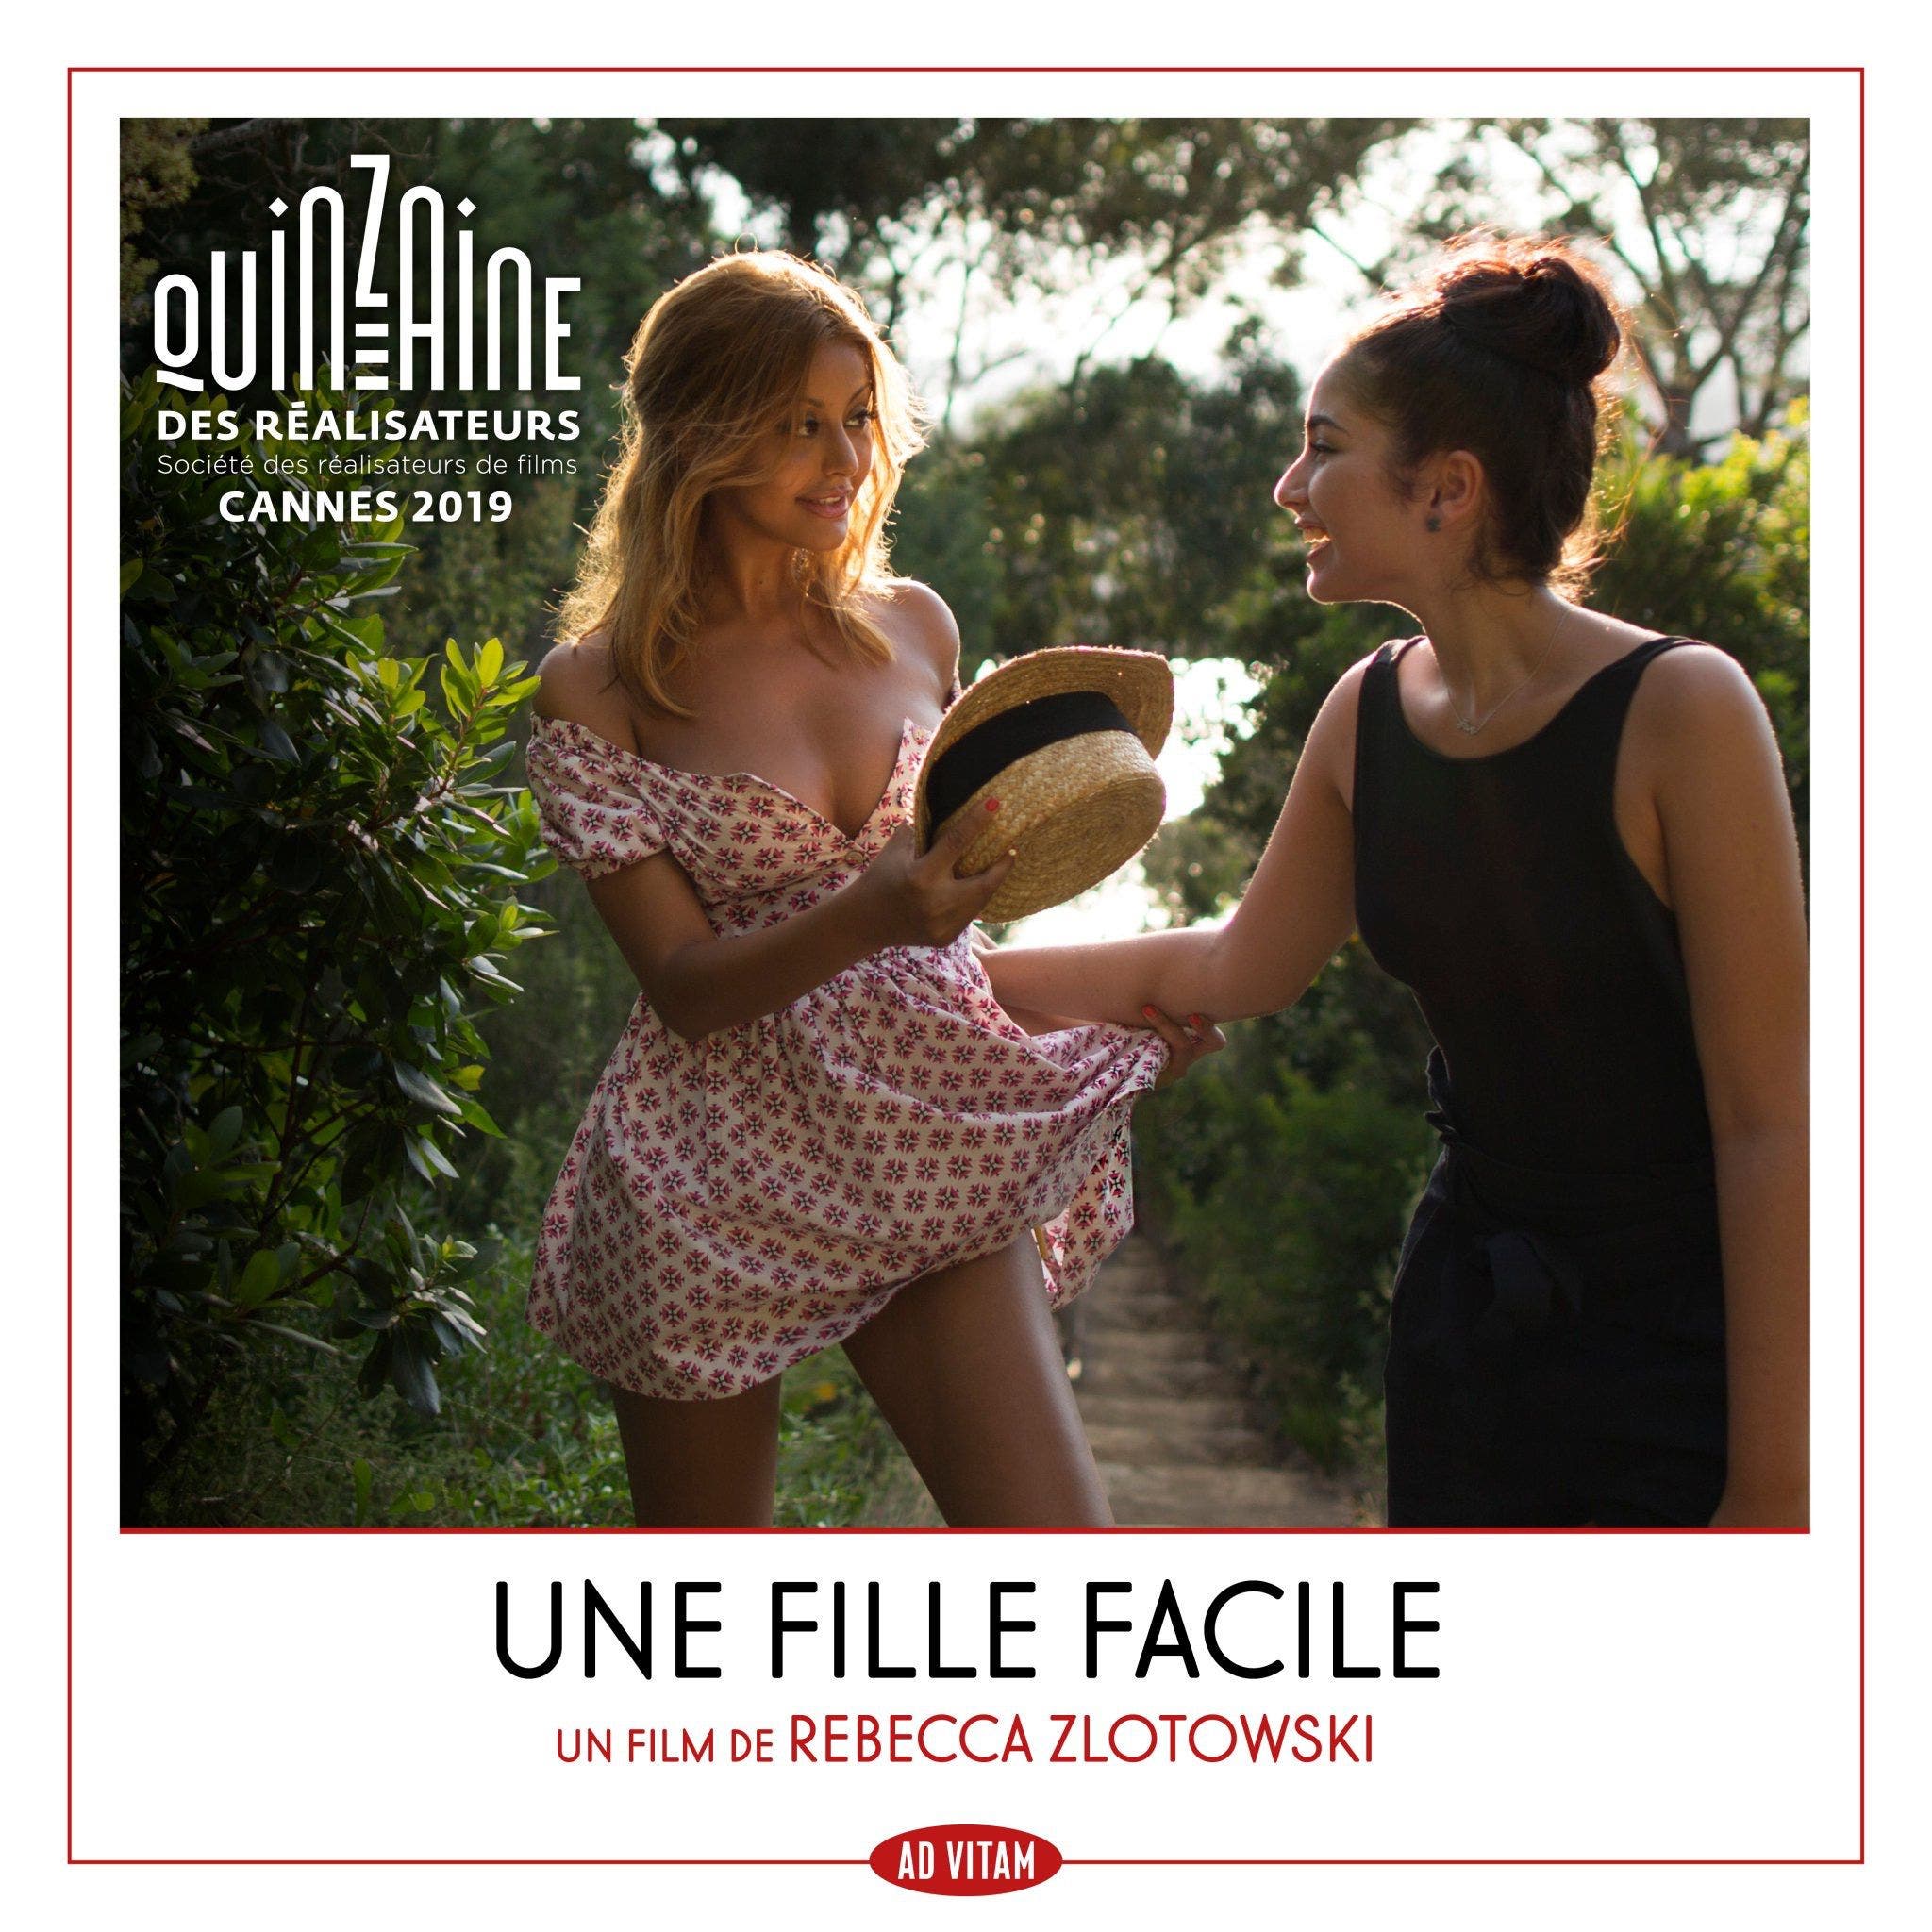 Une fille facile (Streaming, Synopsis, Casting, Bande annonce)